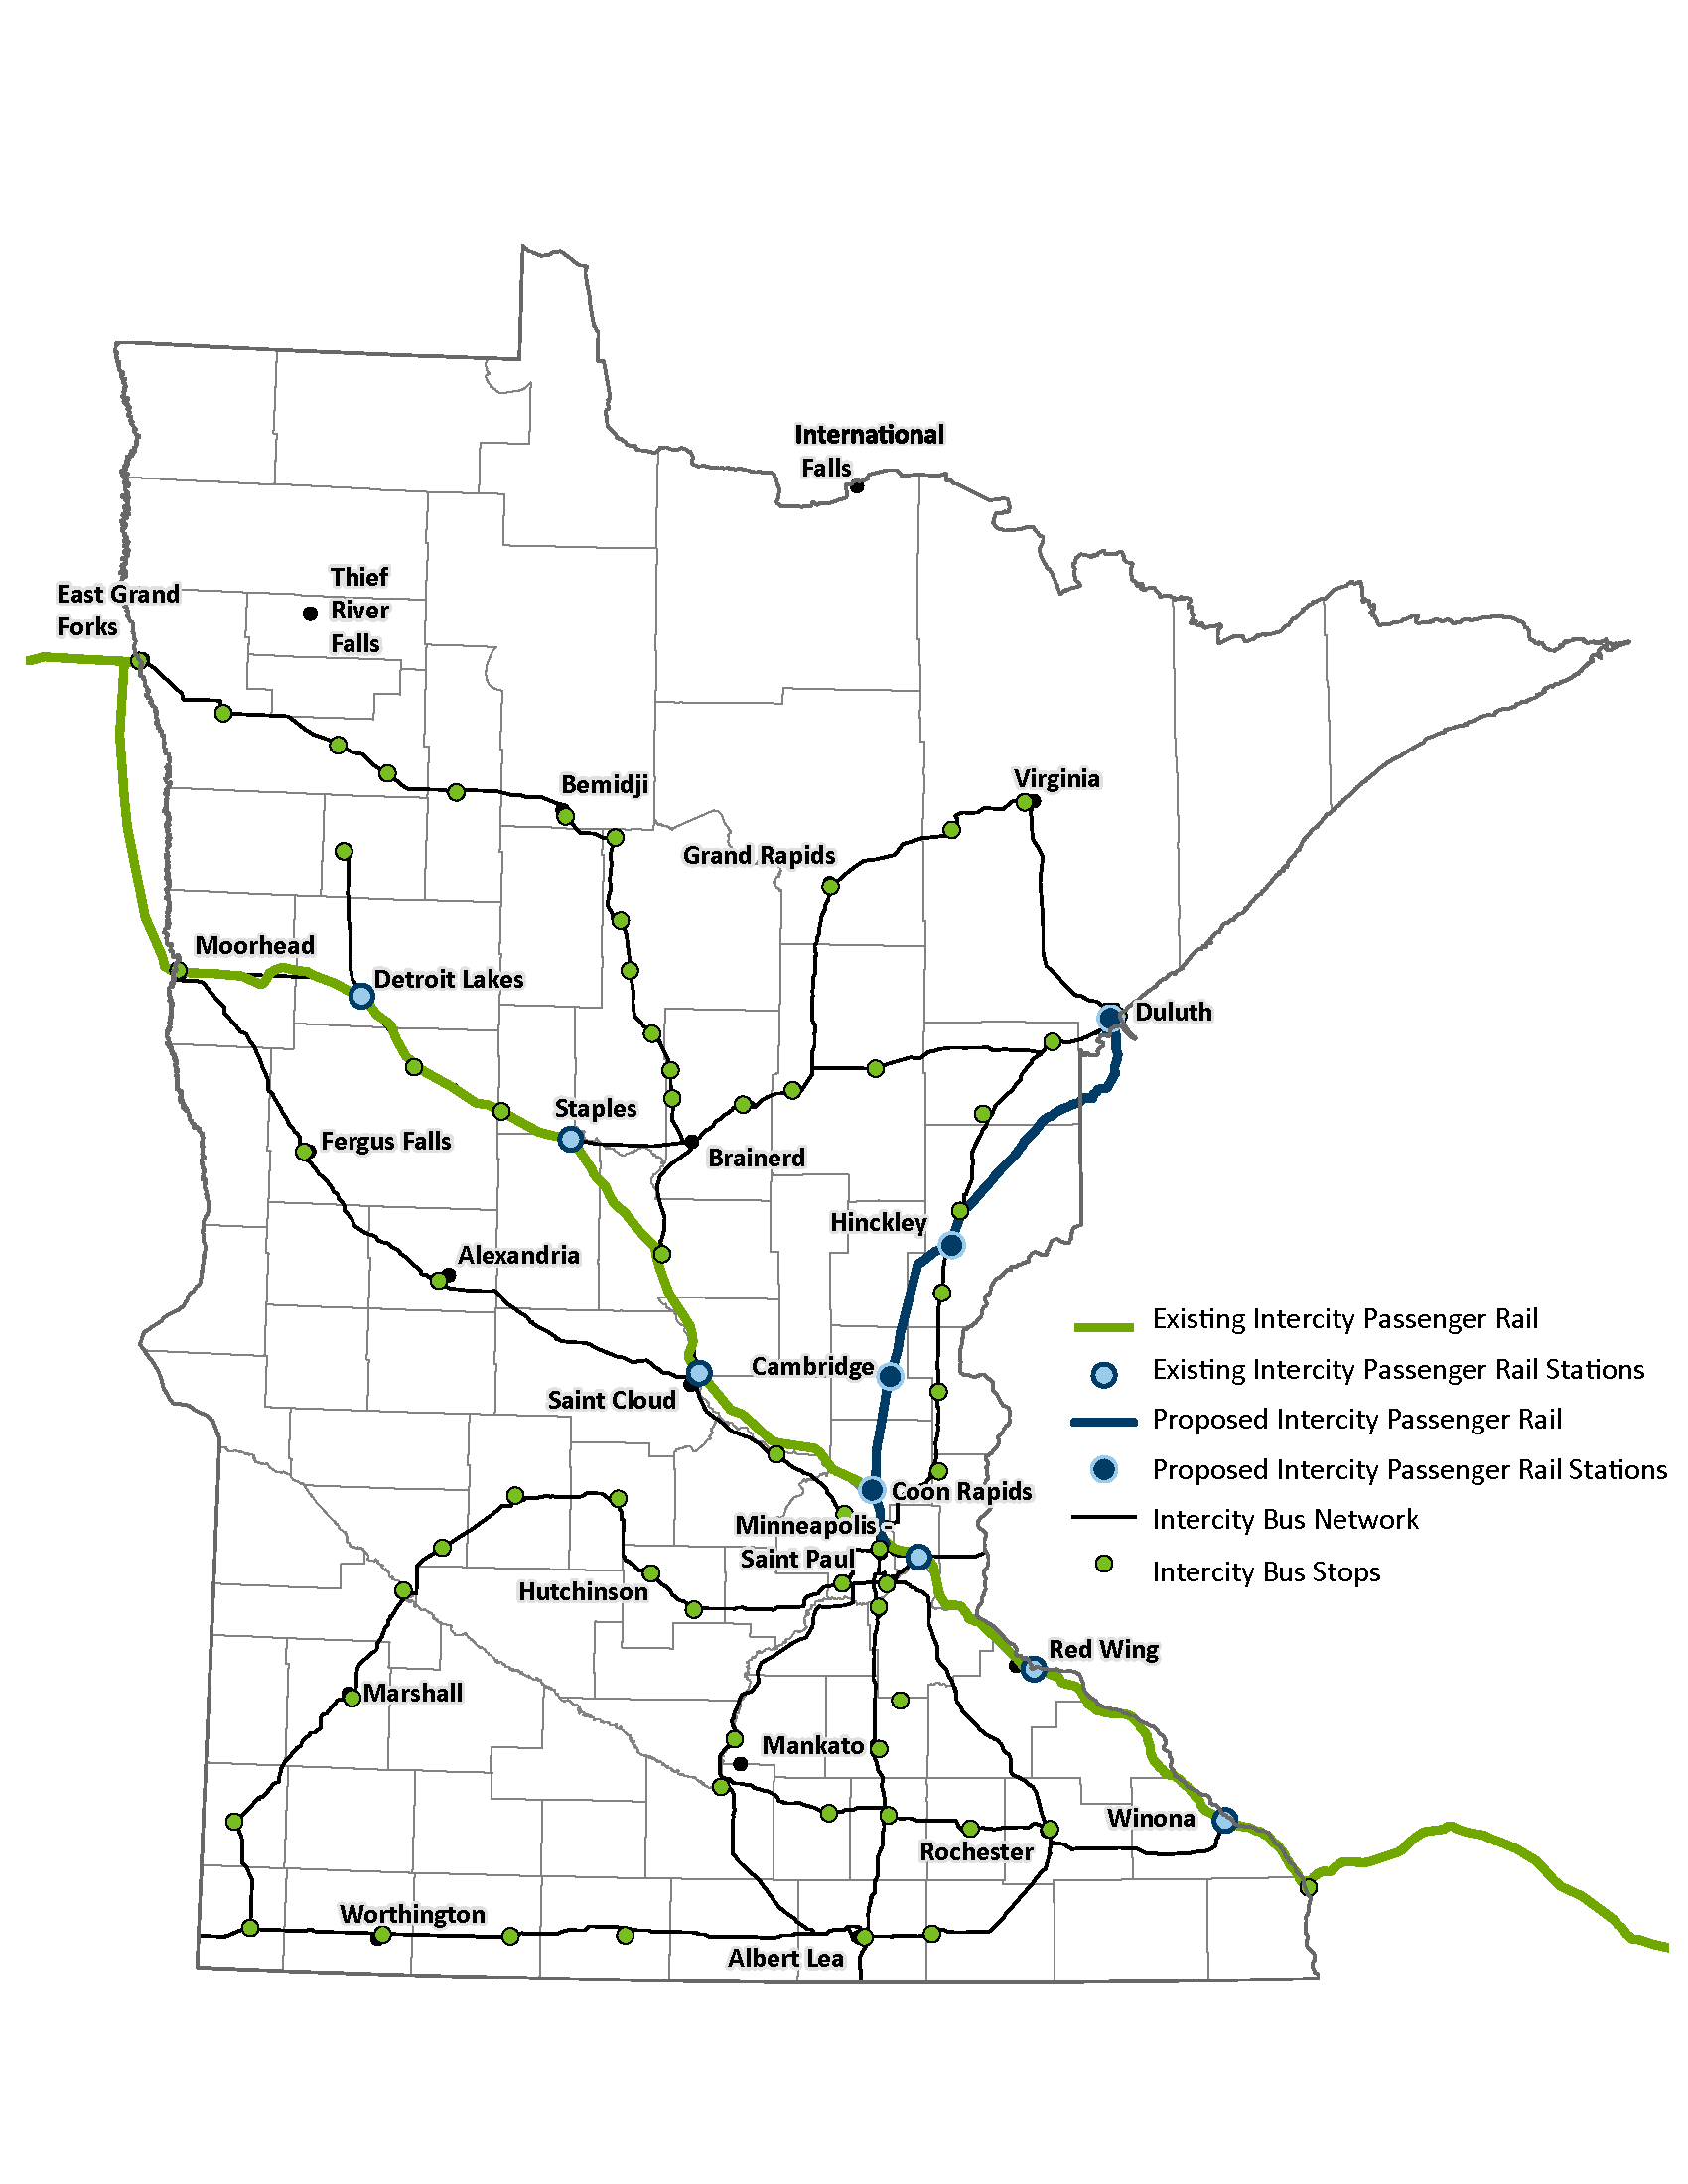 Map of Minnesota with existing and proposed passenger rail routes and station locations. Map also shows intercity bus network routes and bus stops.